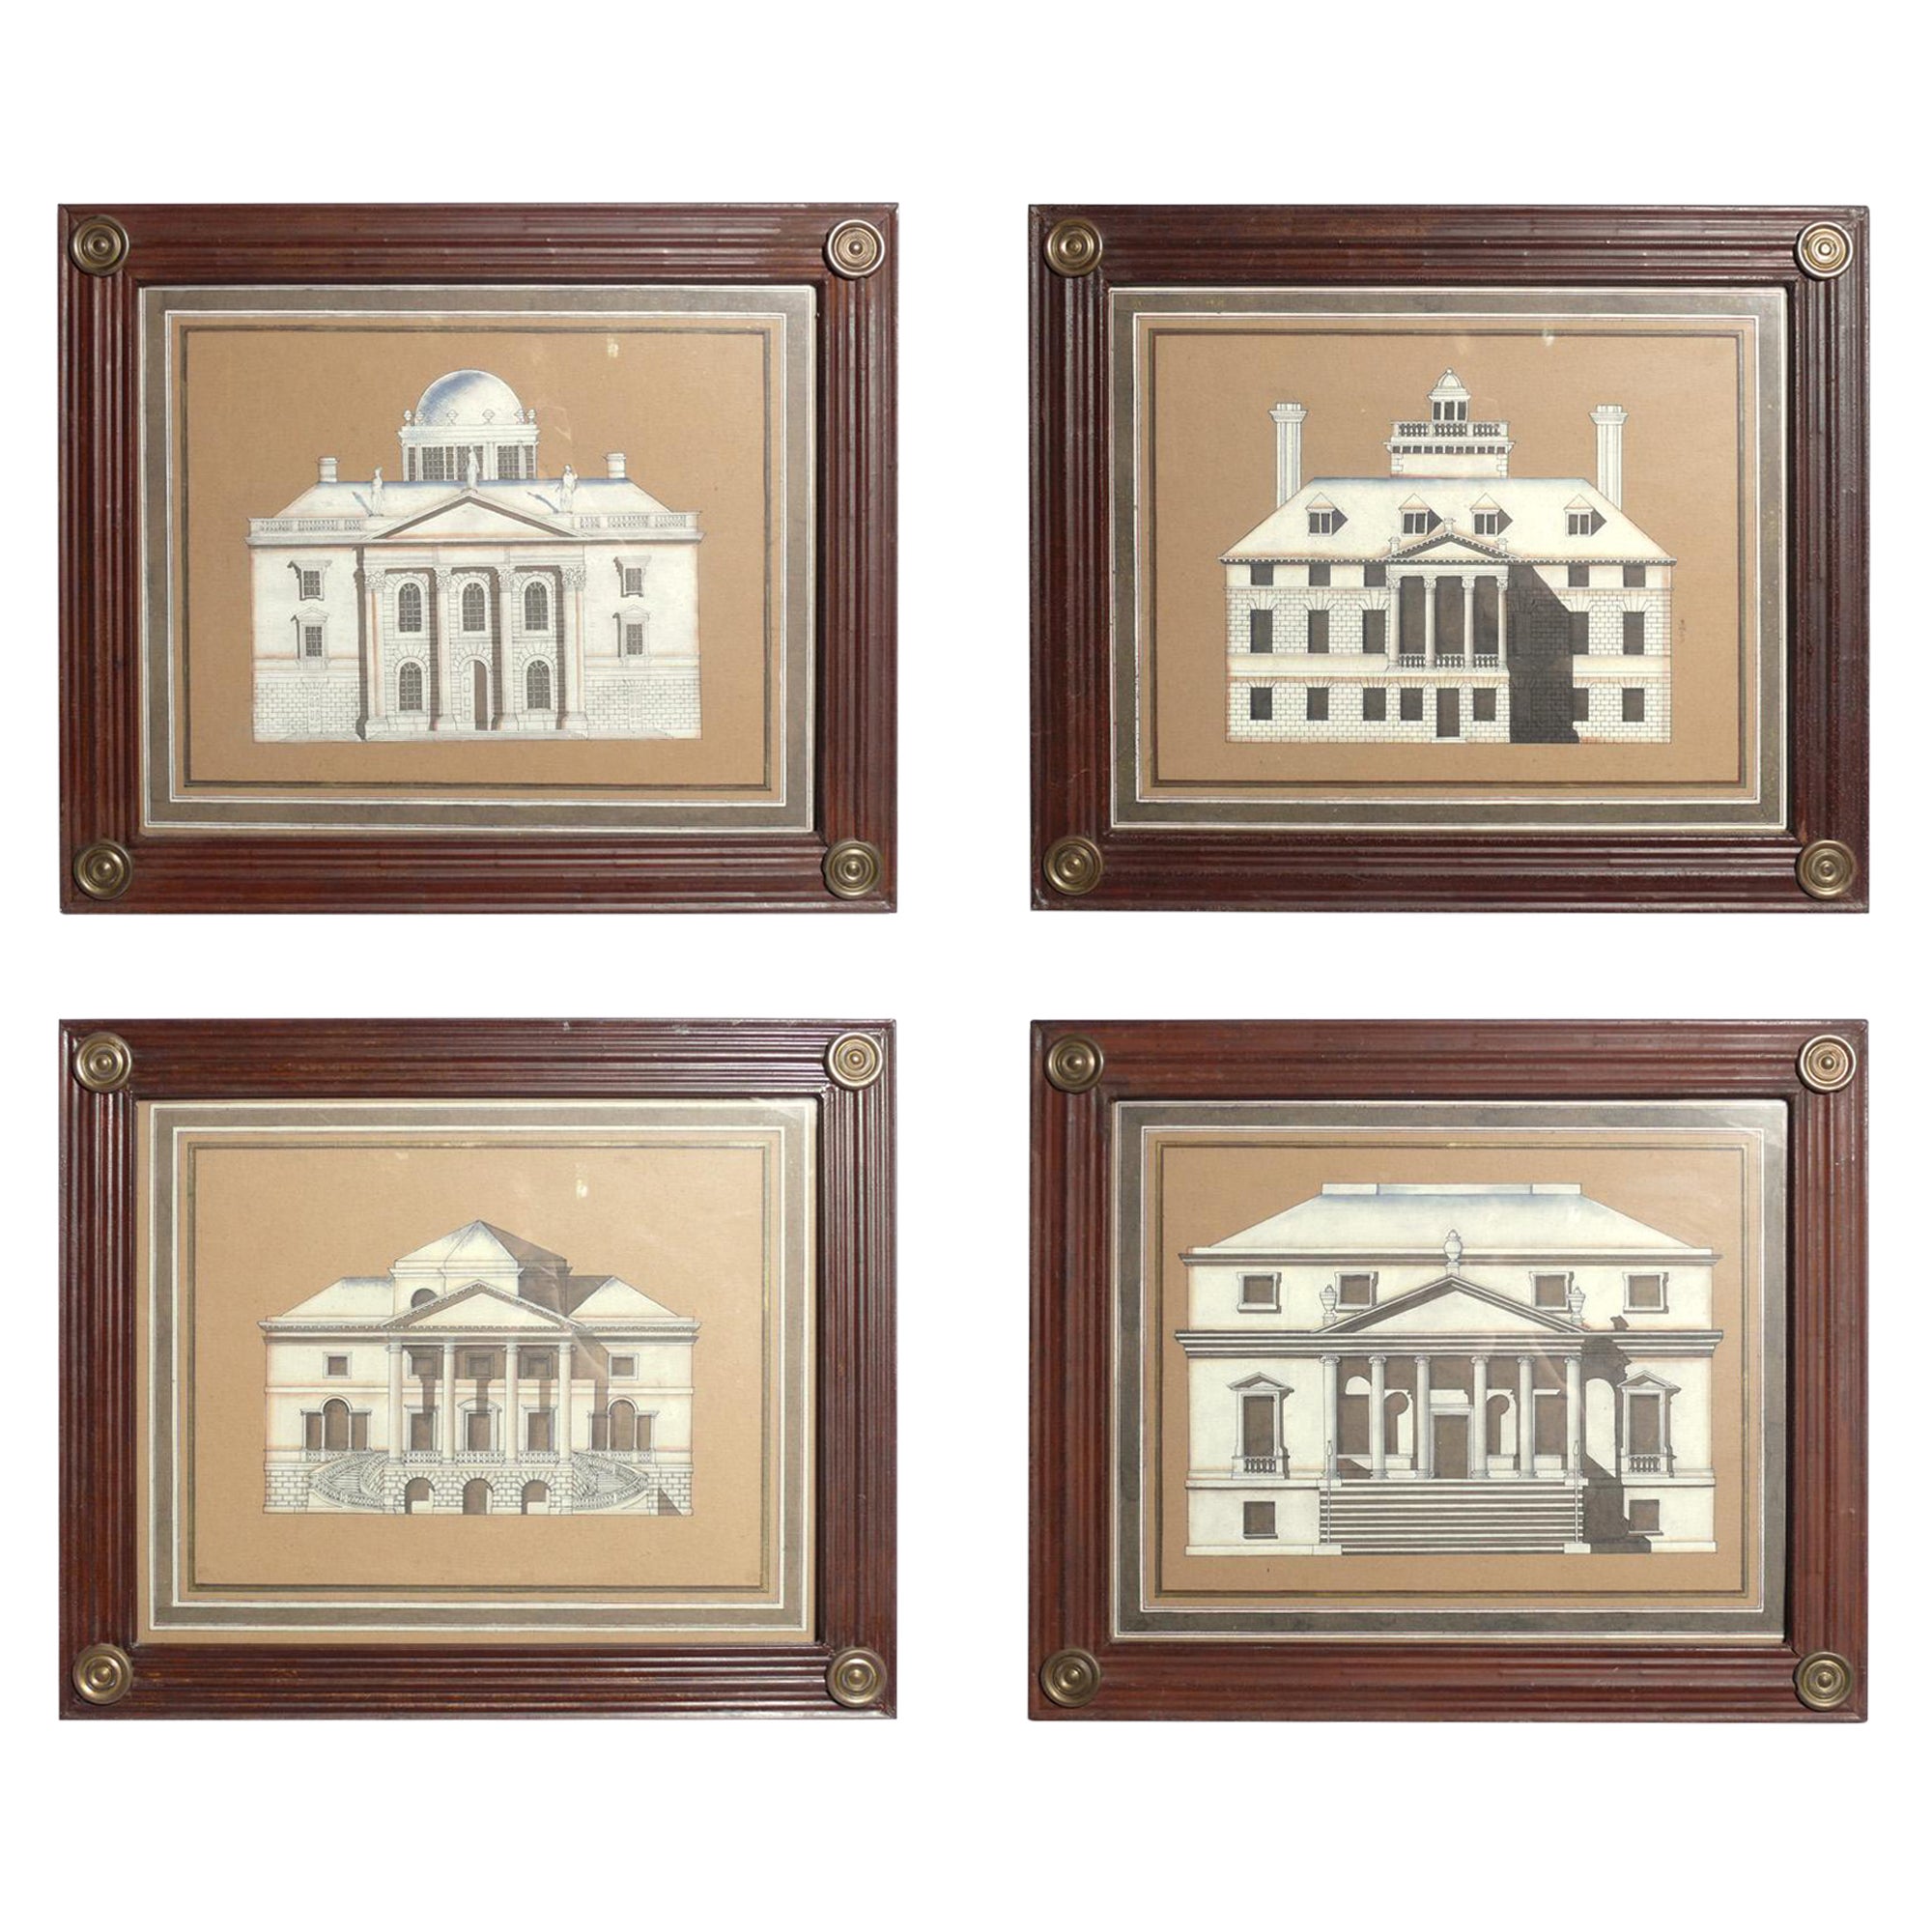 Neoclassical Architectural Drawings for John Rosselli